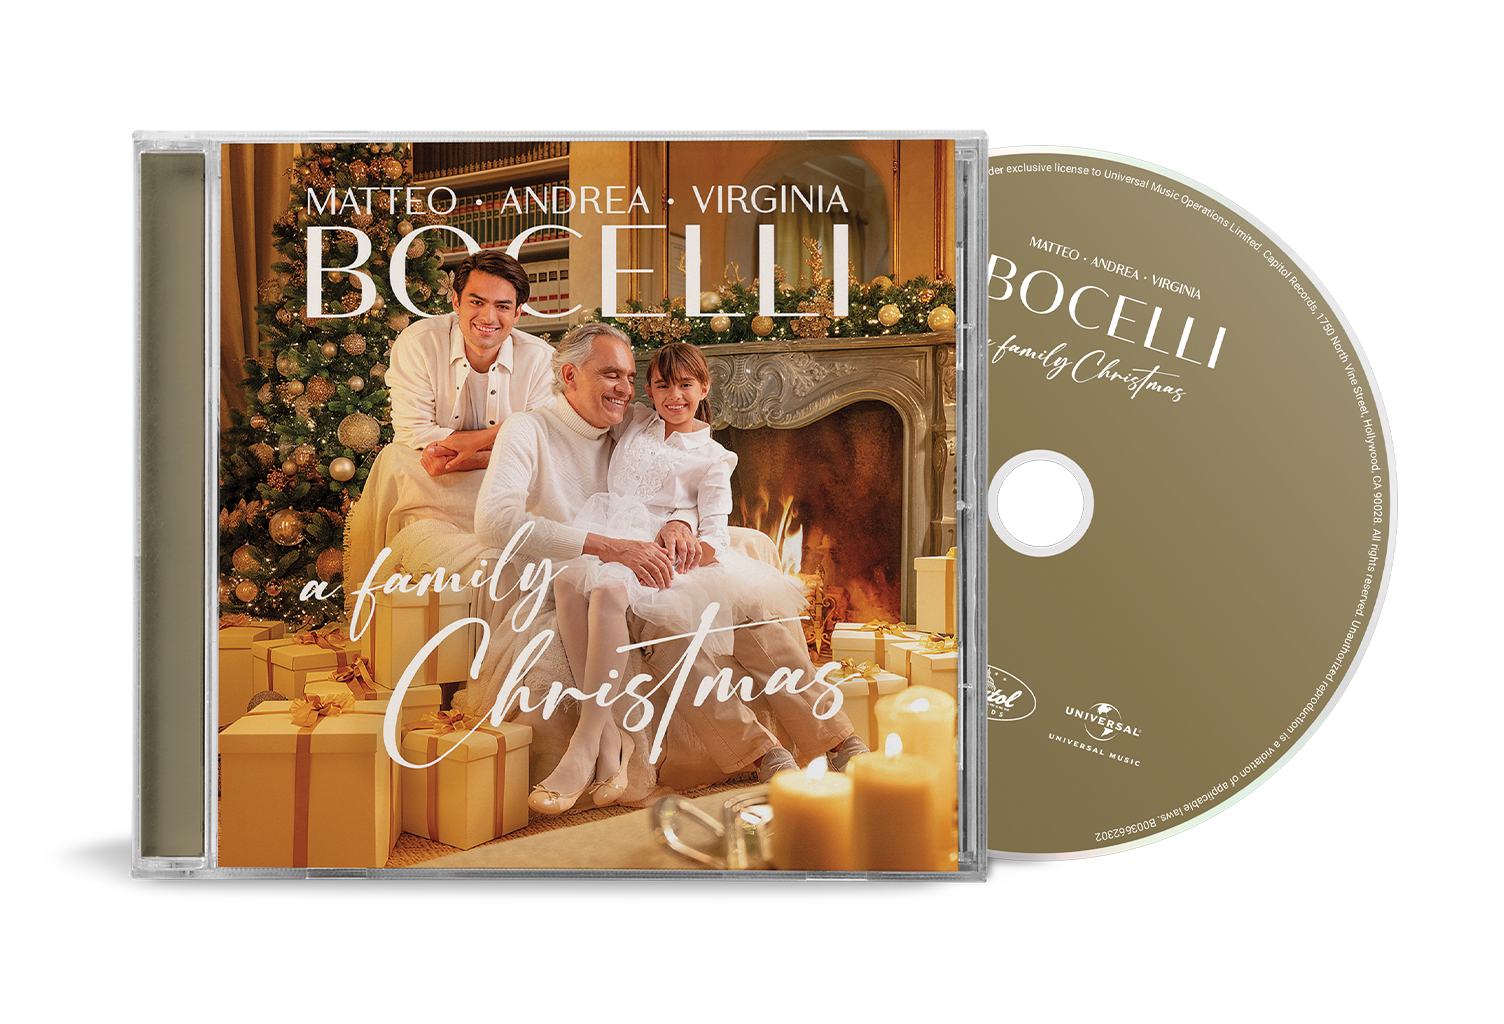 Bocelli: A Family Christmas by Andrea Bocelli from TBN